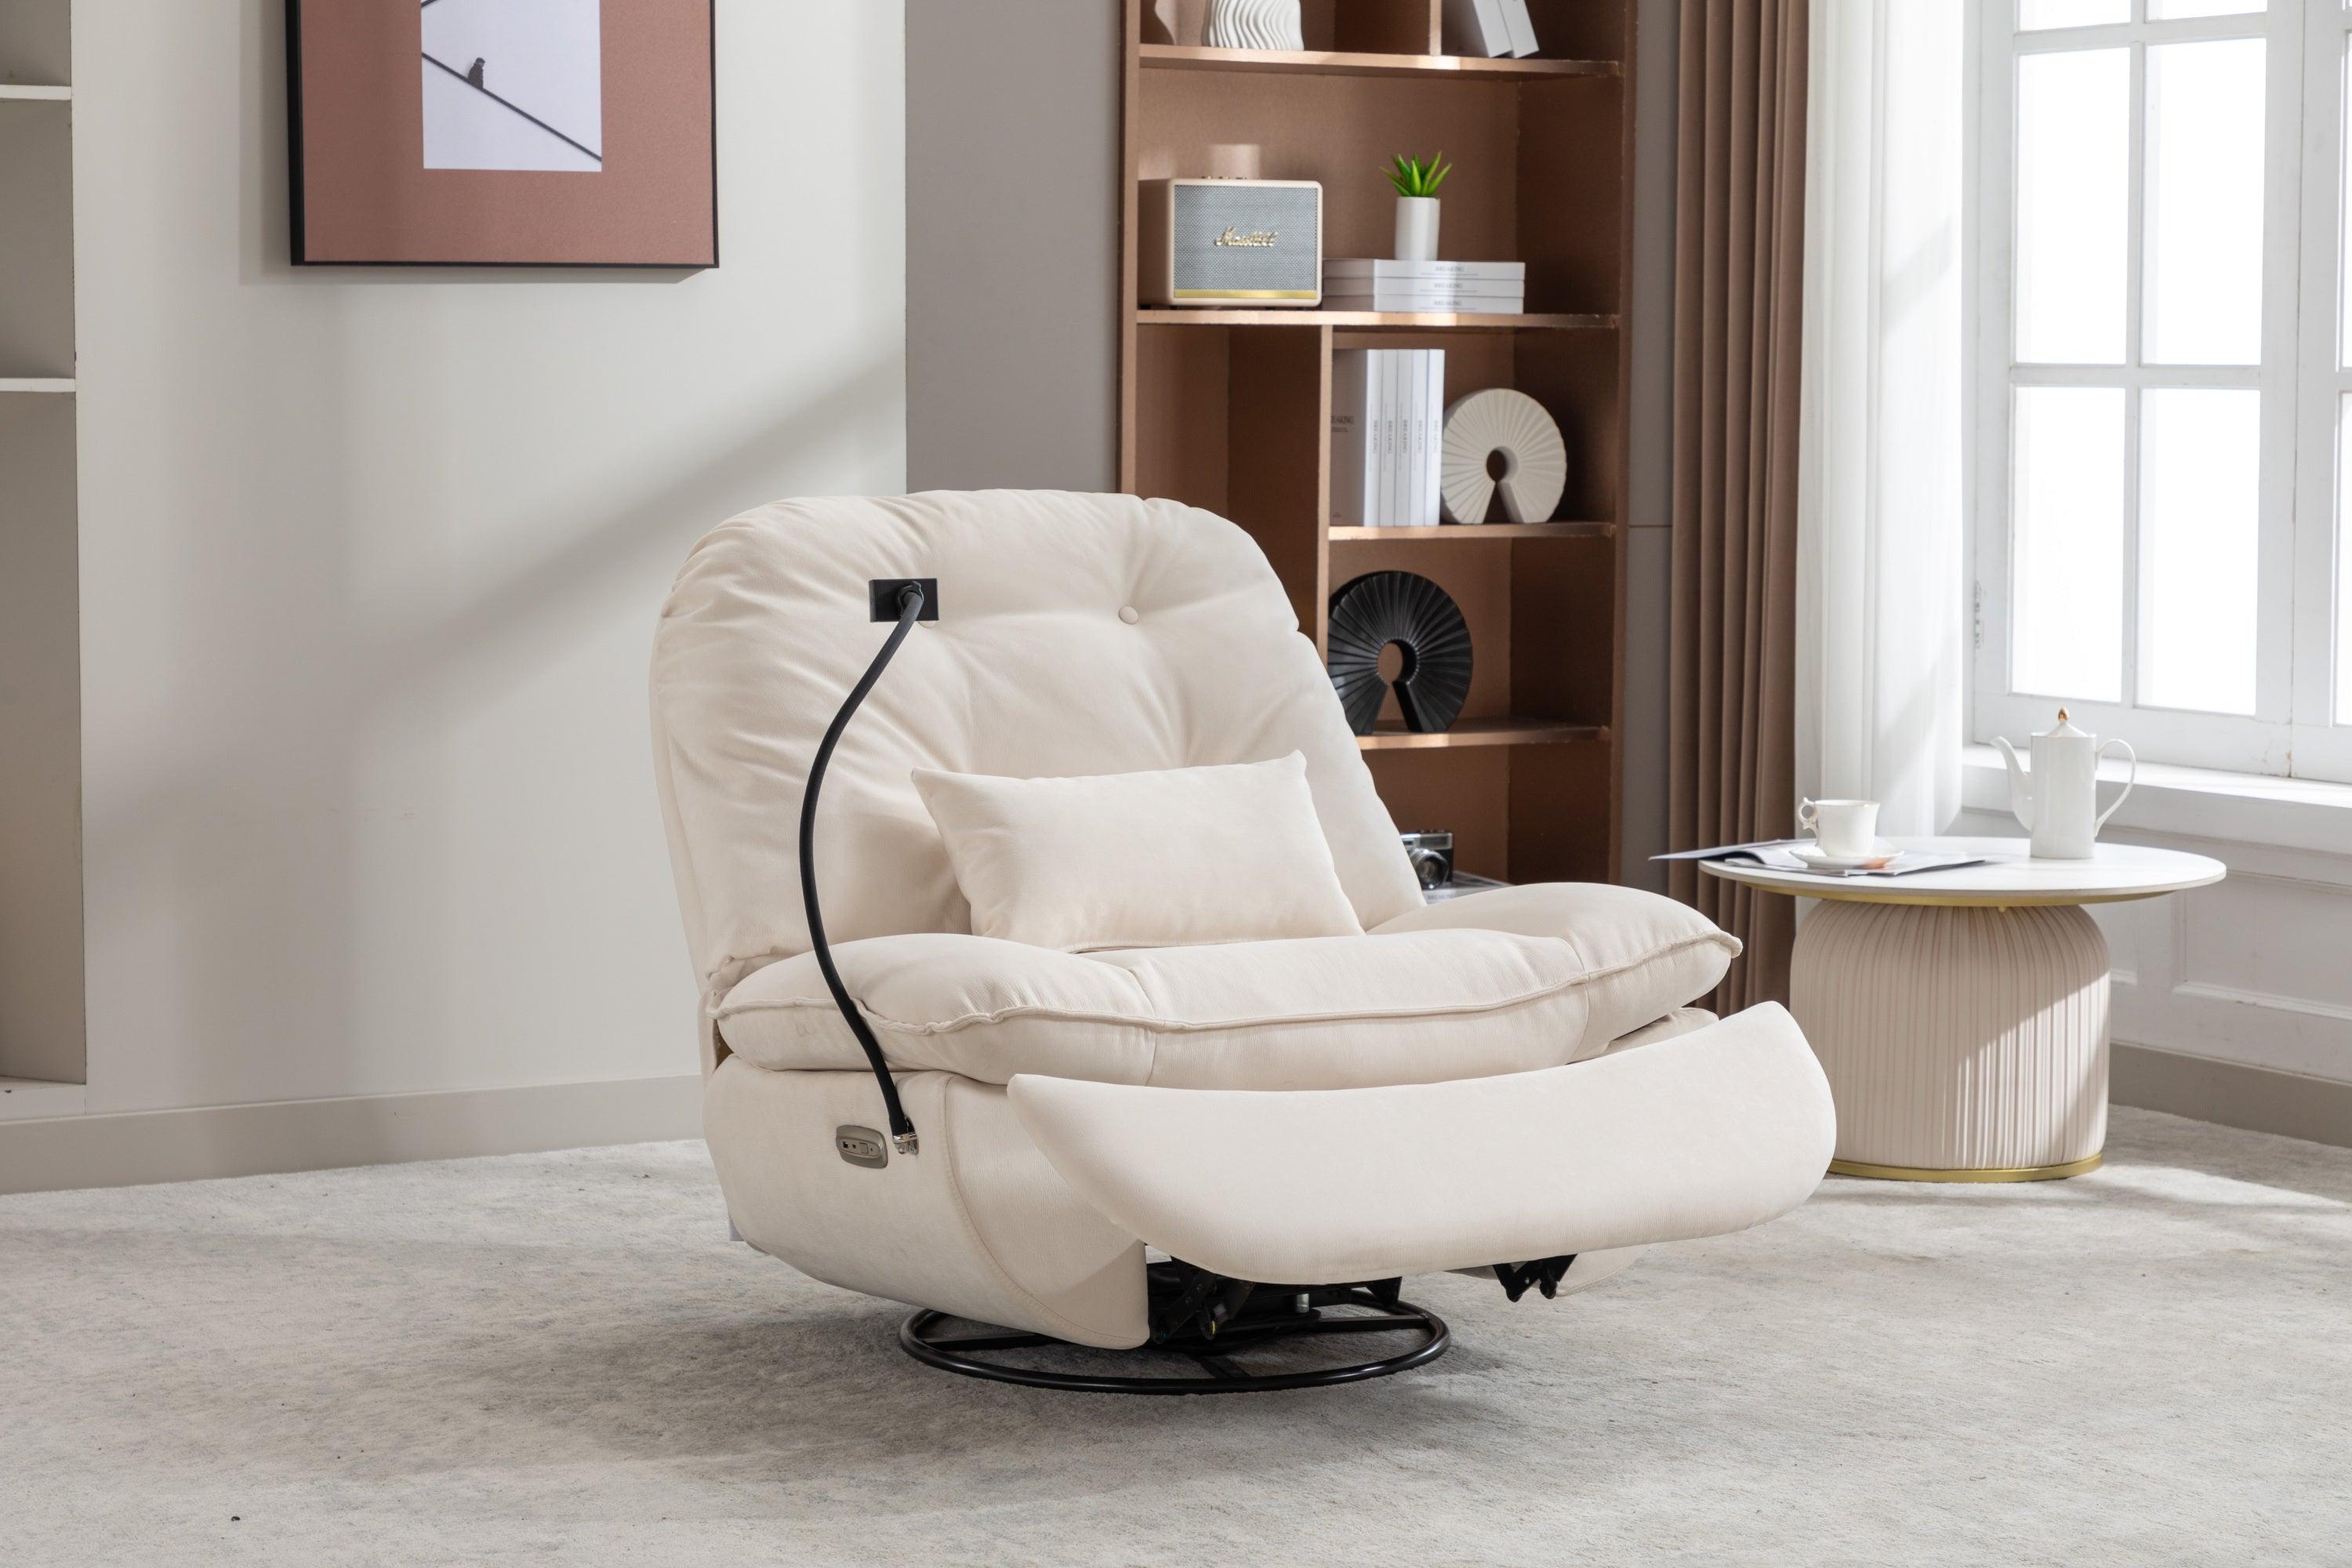 🆓🚛 270 Degree Swivel Power Recliner, Bluetooth Music Player, Usb Ports, 4 Modes Of Intelligent Voice Control, Back & Forth Swing, Hidden Arm Storage & Mobile Phone Holder, Cream Color